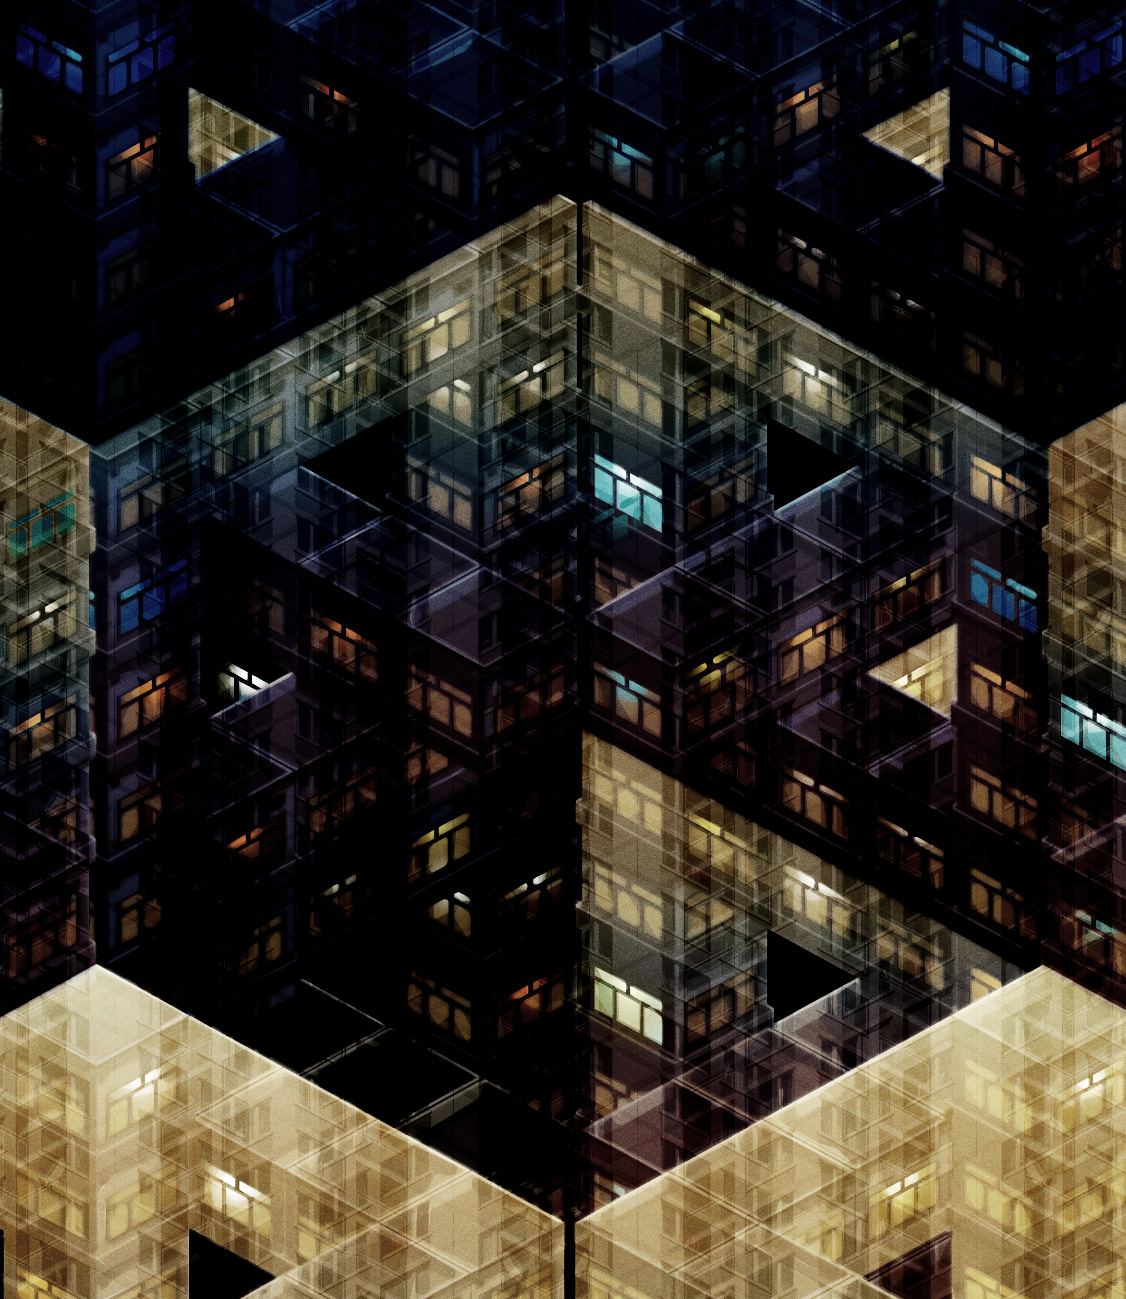 imaginary city, cityscape, kowloon, walled city, limited edition , digital giclee art print by Laurent Bompard